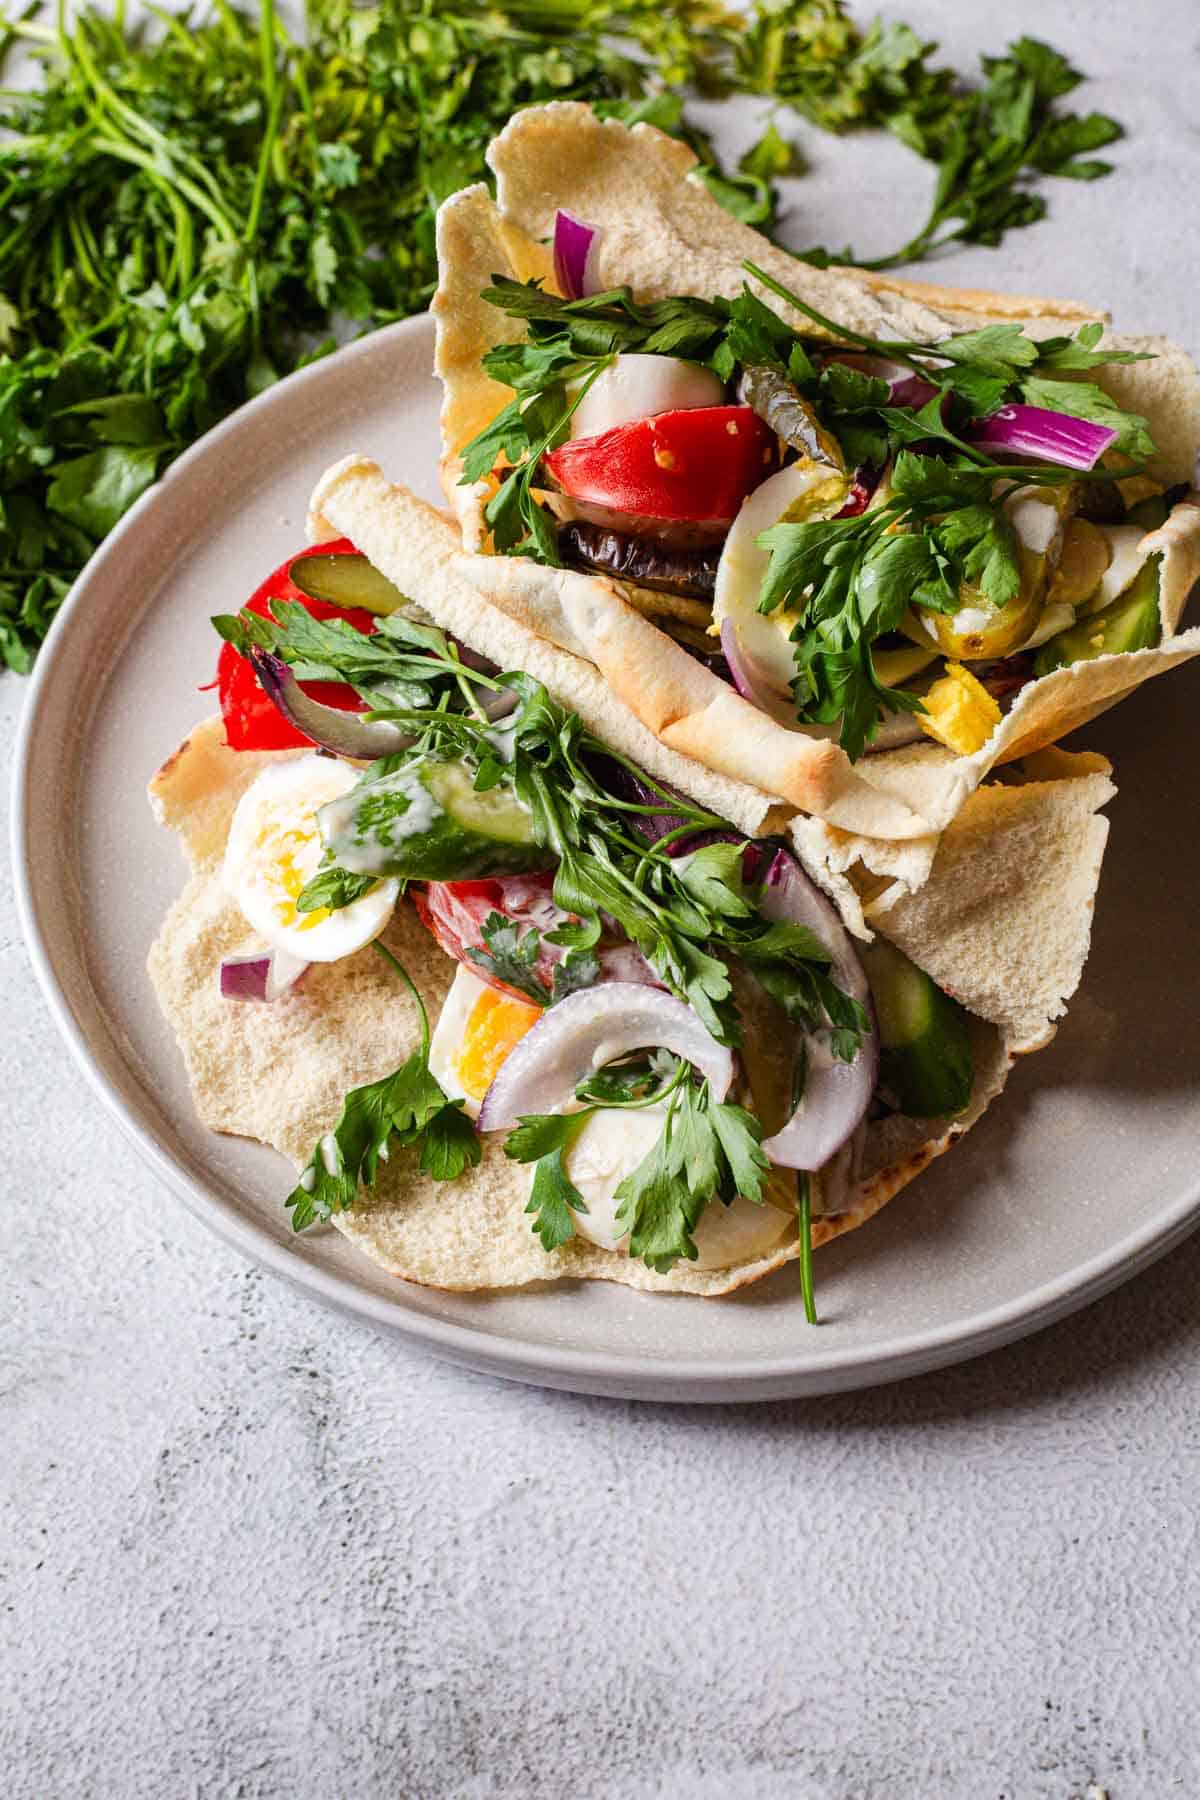 A plate with two pitas and vegetables on it.